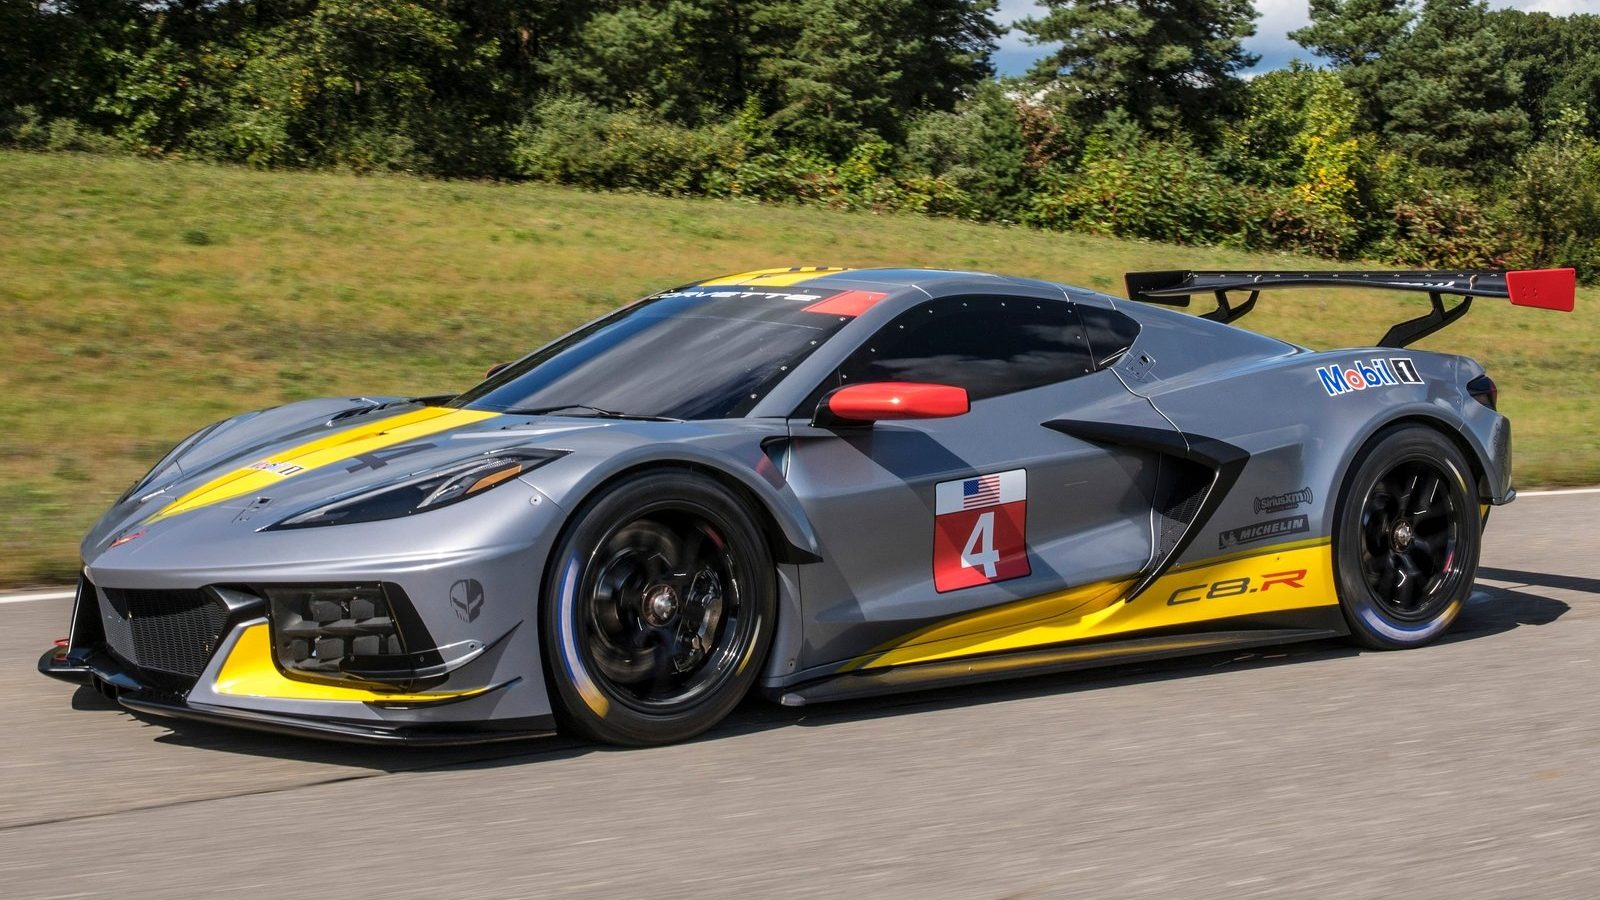 An image of a Chevrolet Corvette C8.R parked outdoors.